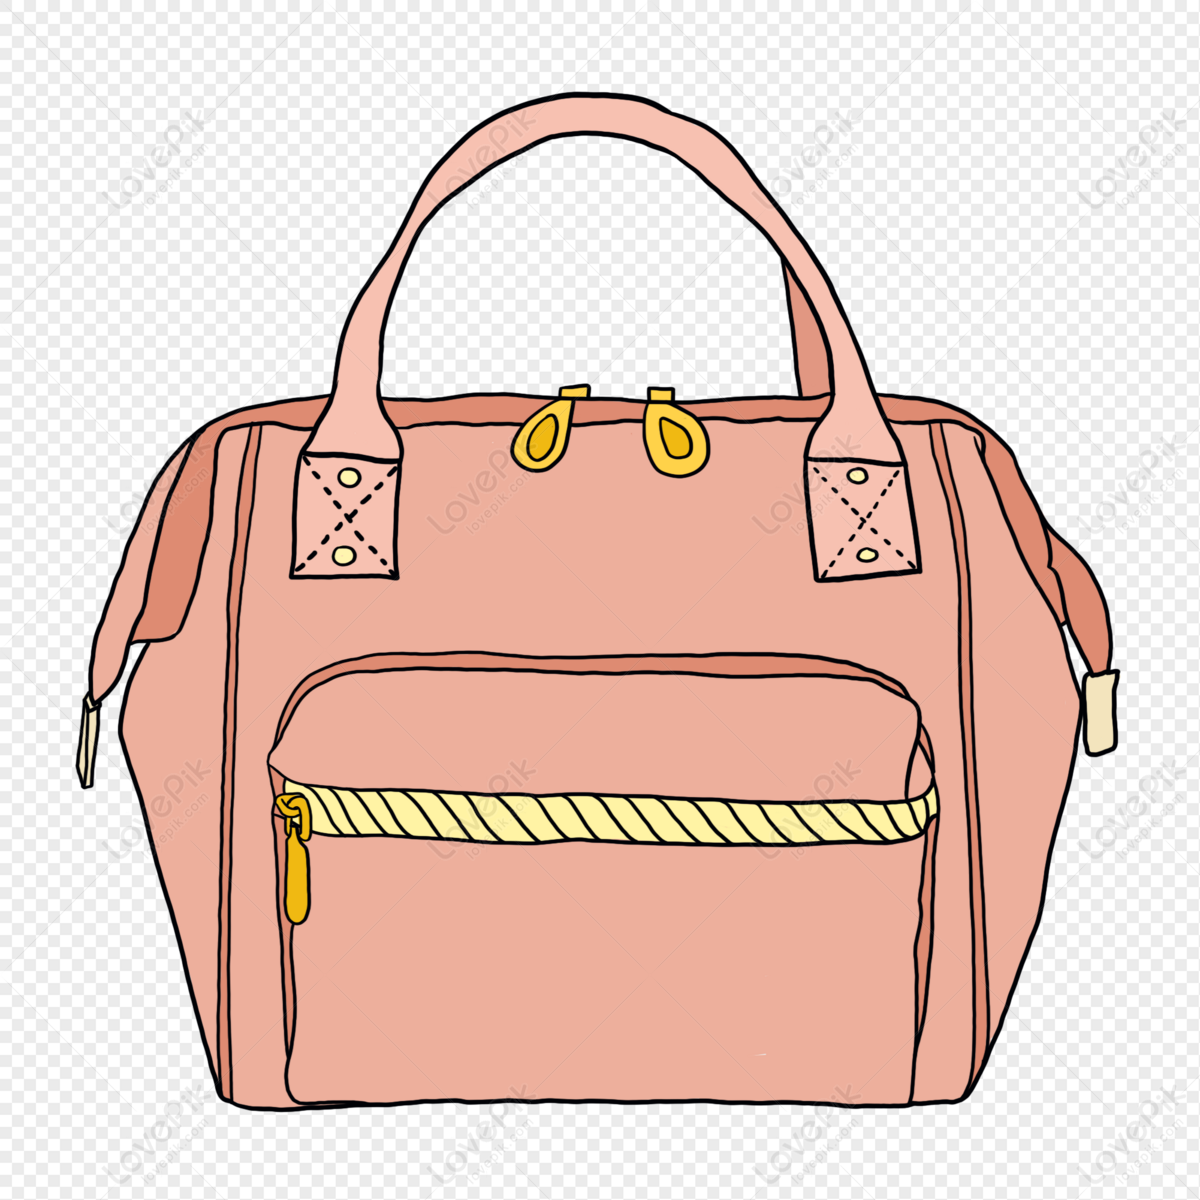 Ladies Bag On Transparent Background PNG Image PNG Images | PNG Free  Download - Pikbest